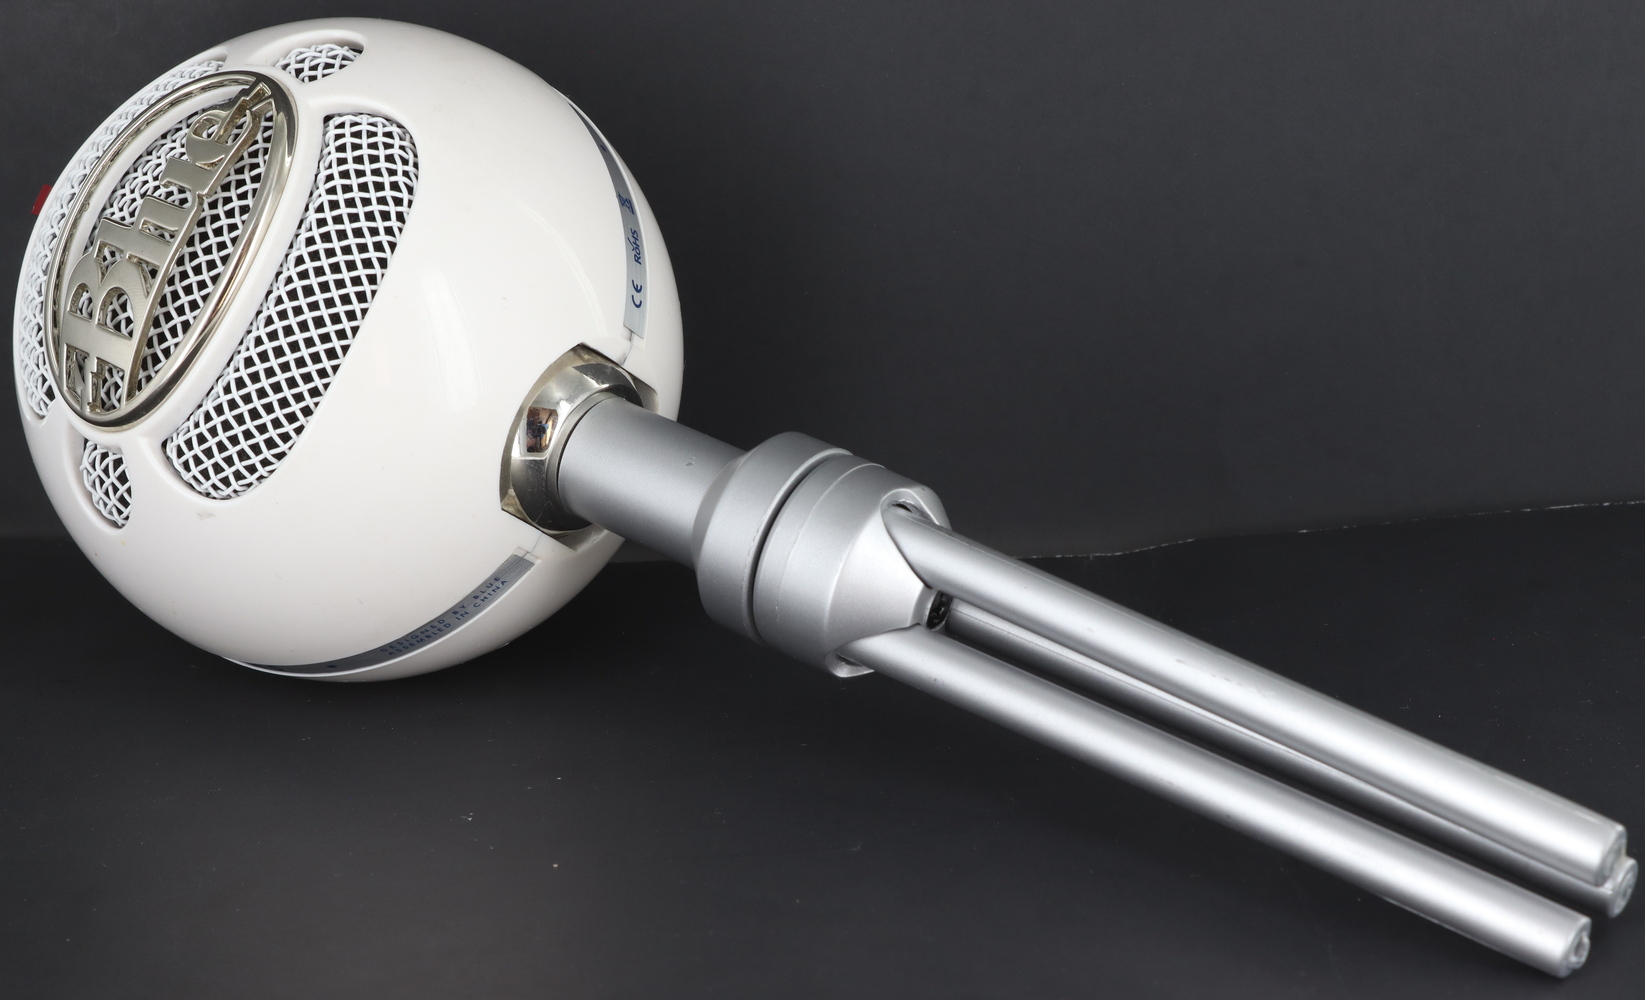 blue showball ice microphone plug&play white w/adapter and charger cord